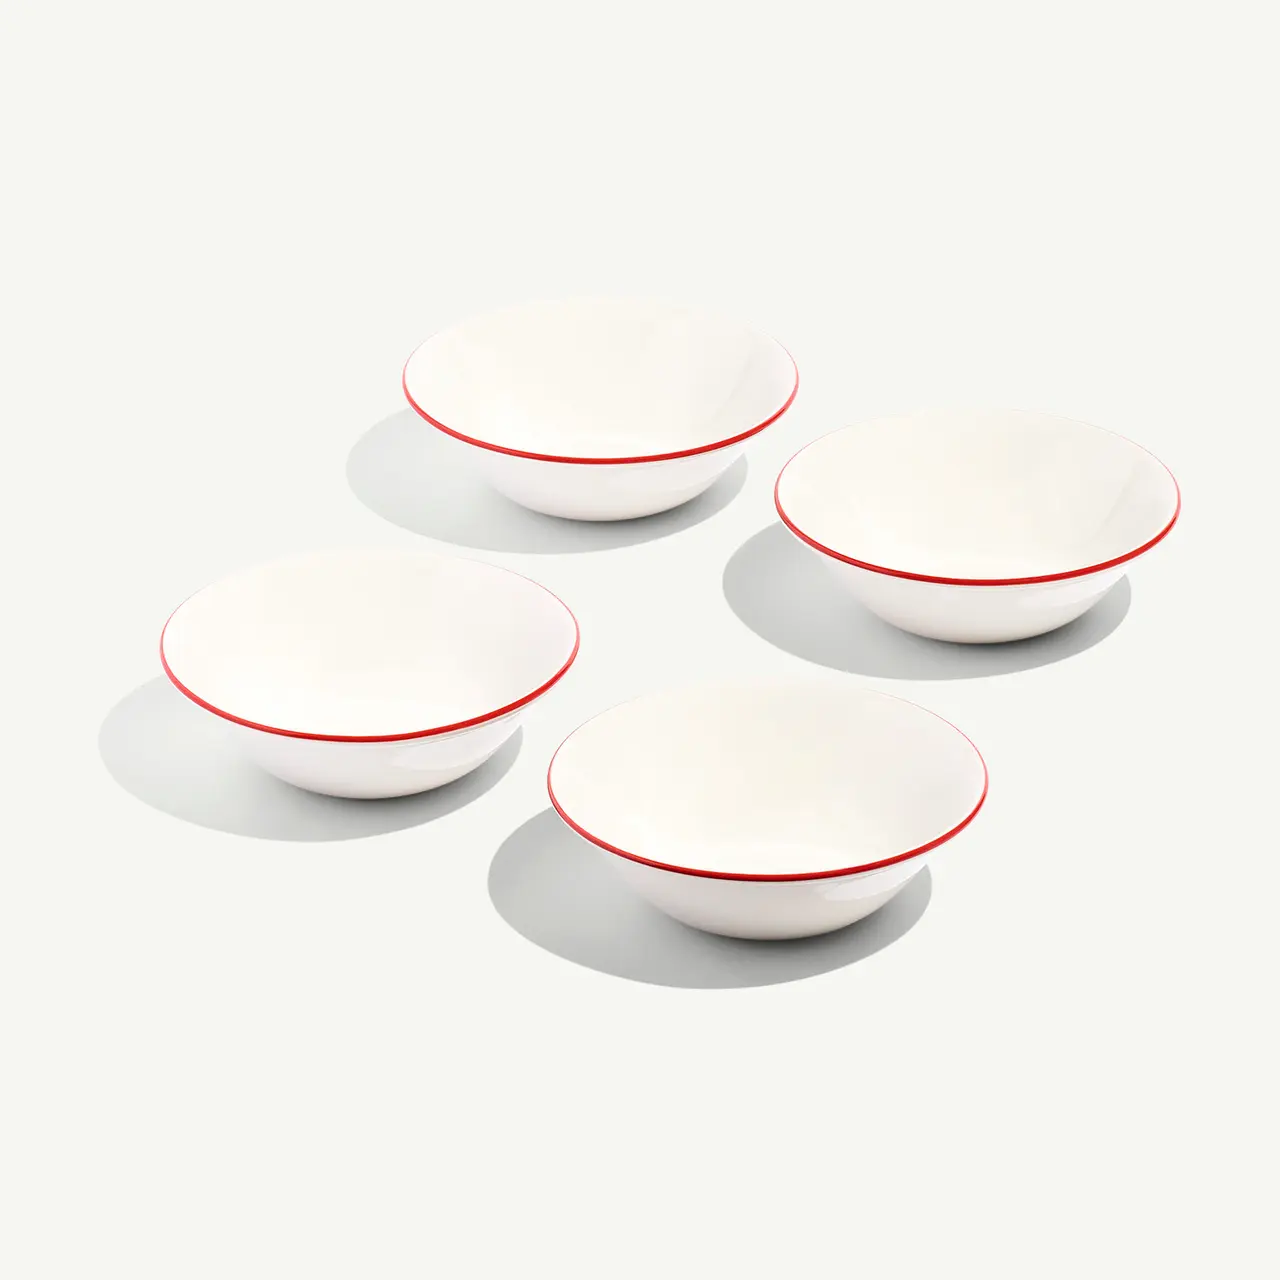 Four white bowls with red rims are arranged on a pale surface.